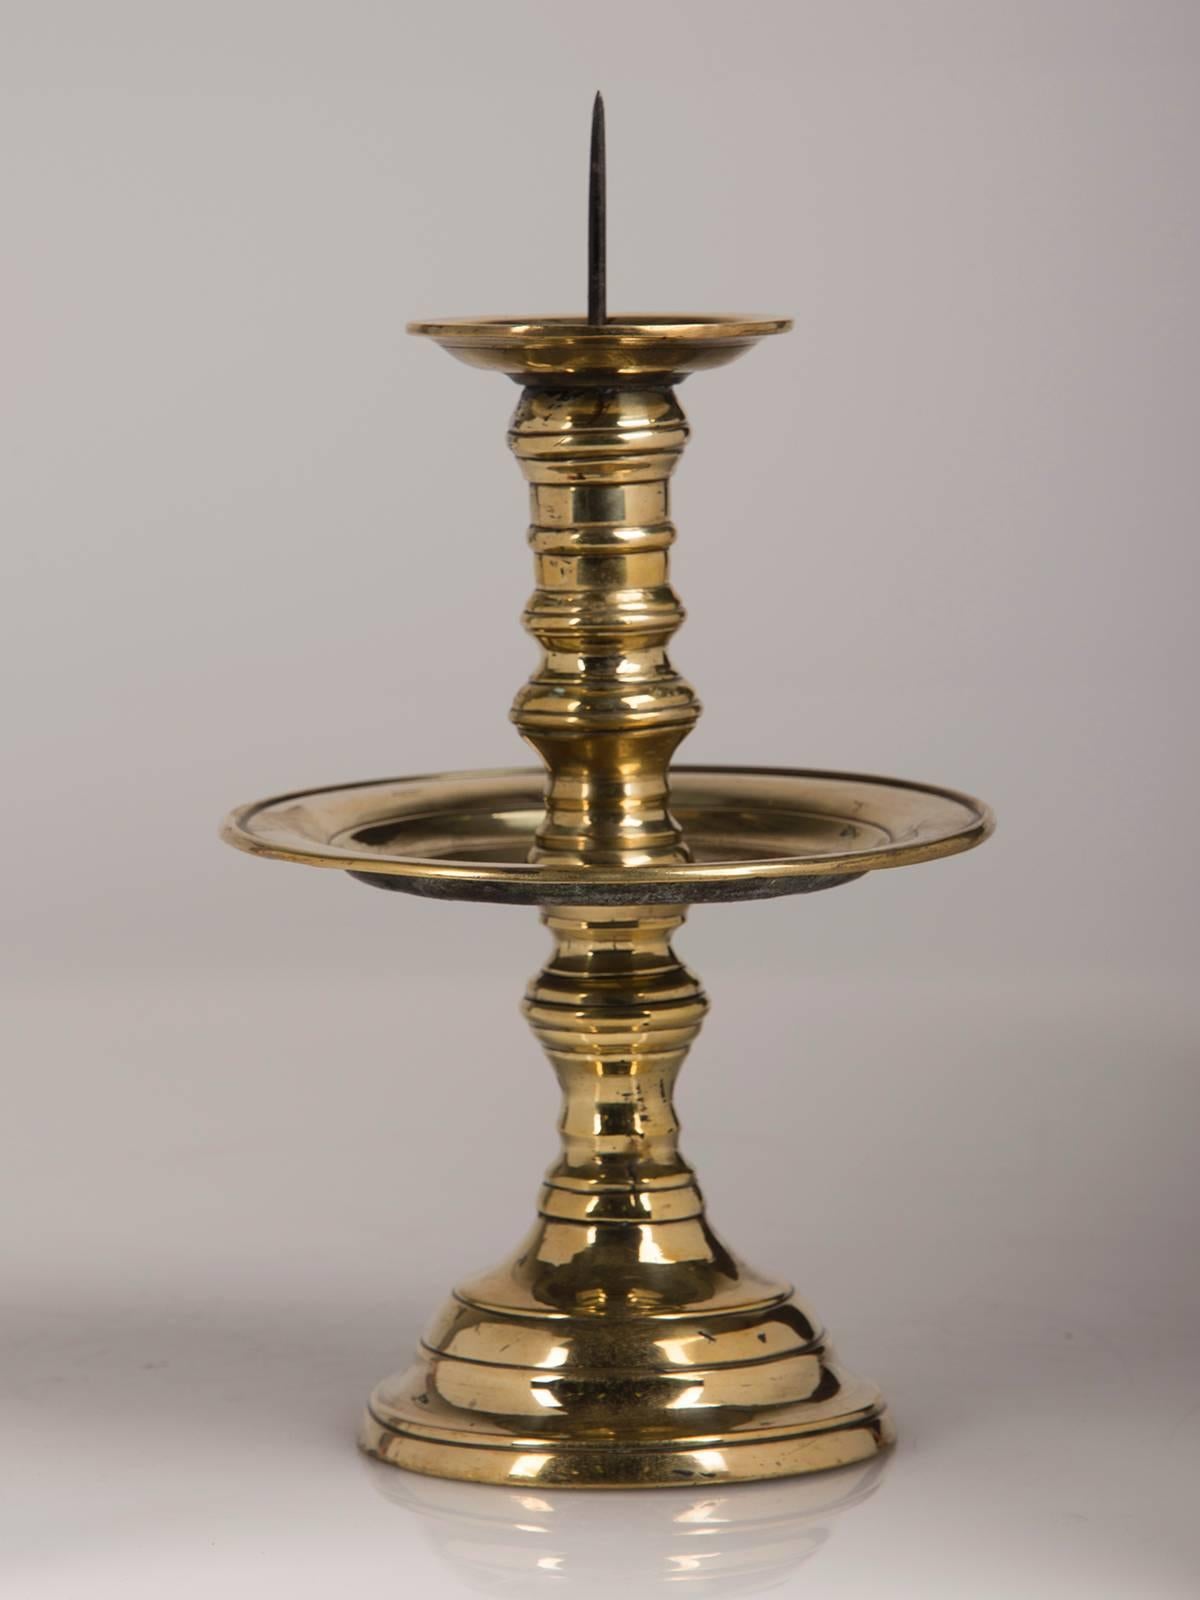 Receive our new selections direct from 1stdibs by email each week. Please click Follow Dealer below and see them first!

A pair of antique English George II period brass candlesticks circa 1740.